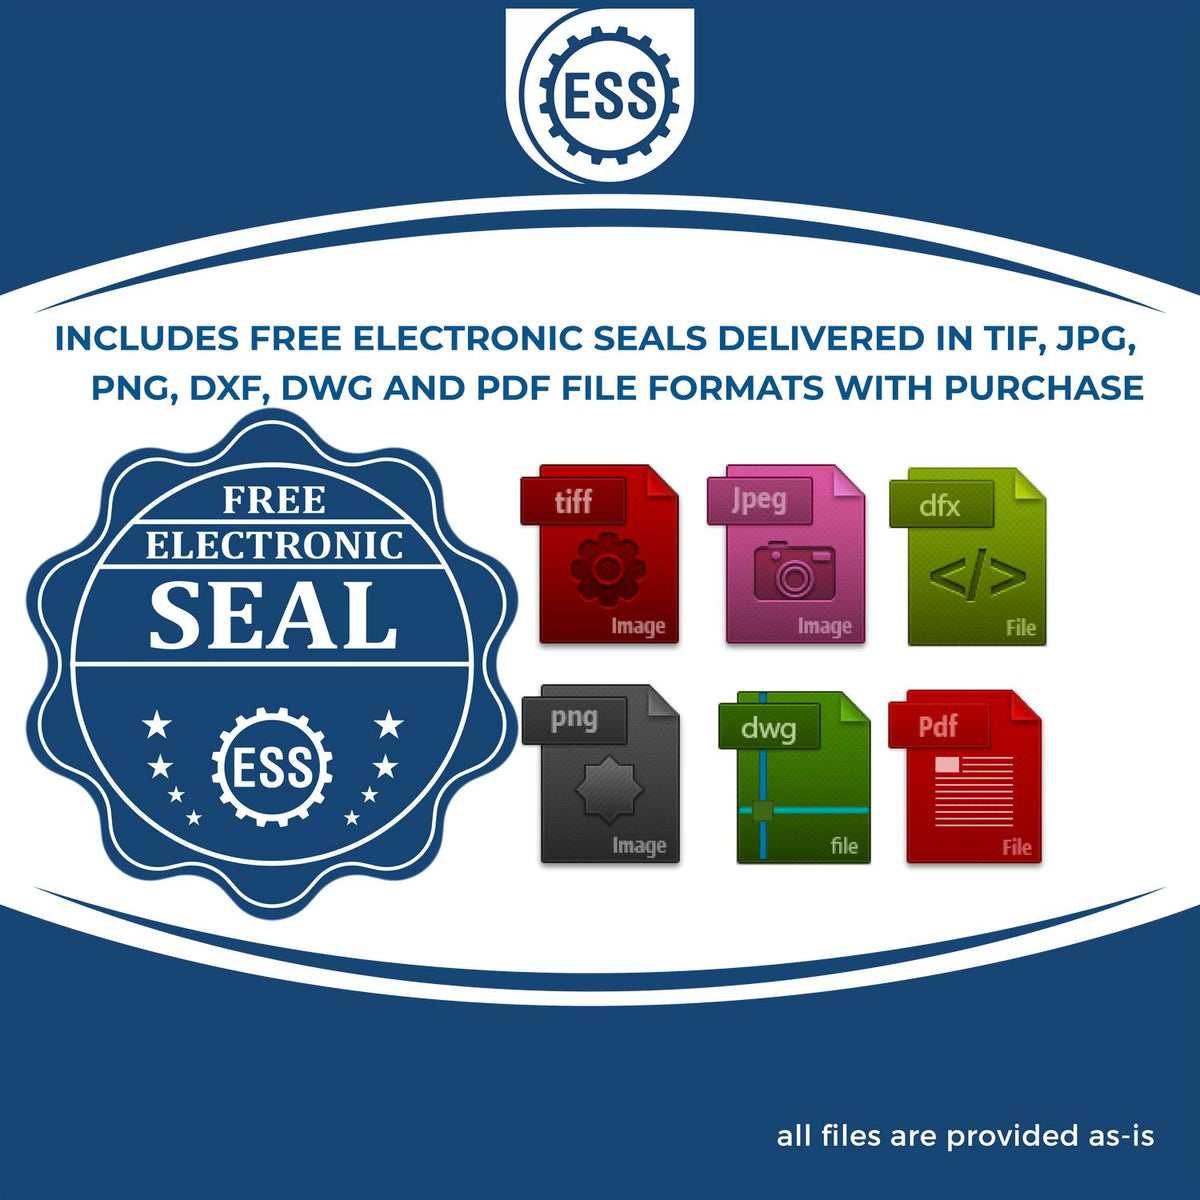 An infographic for the free electronic seal for the Slim Pre-Inked Ohio Professional Geologist Seal Stamp illustrating the different file type icons such as DXF, DWG, TIF, JPG and PNG.